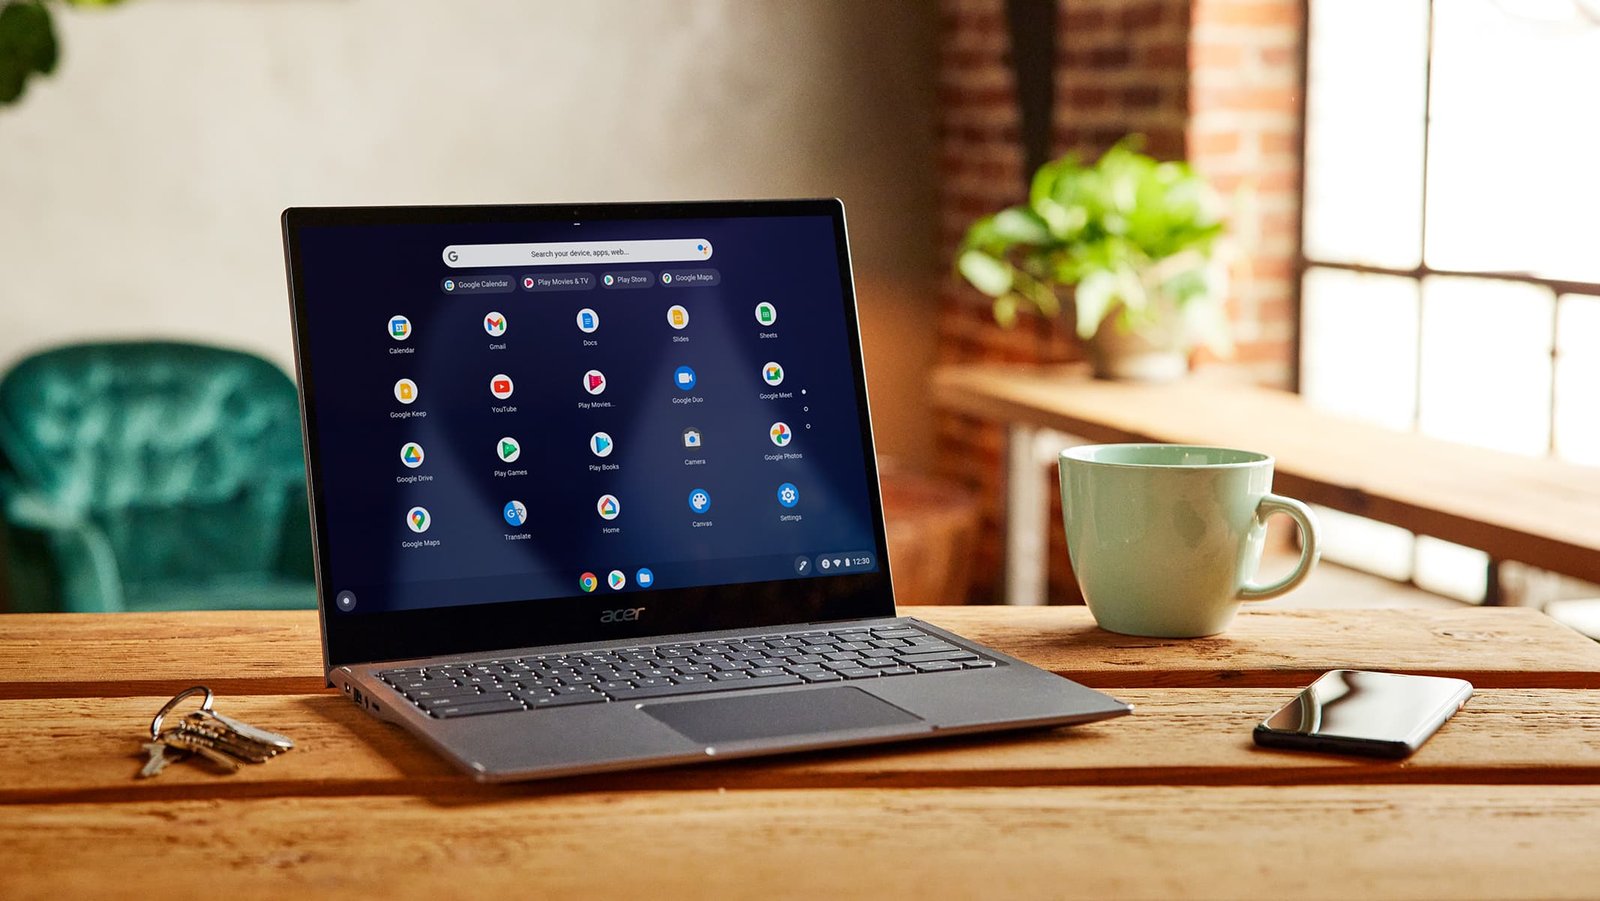 How To Revert a Chrome OS to a previous version